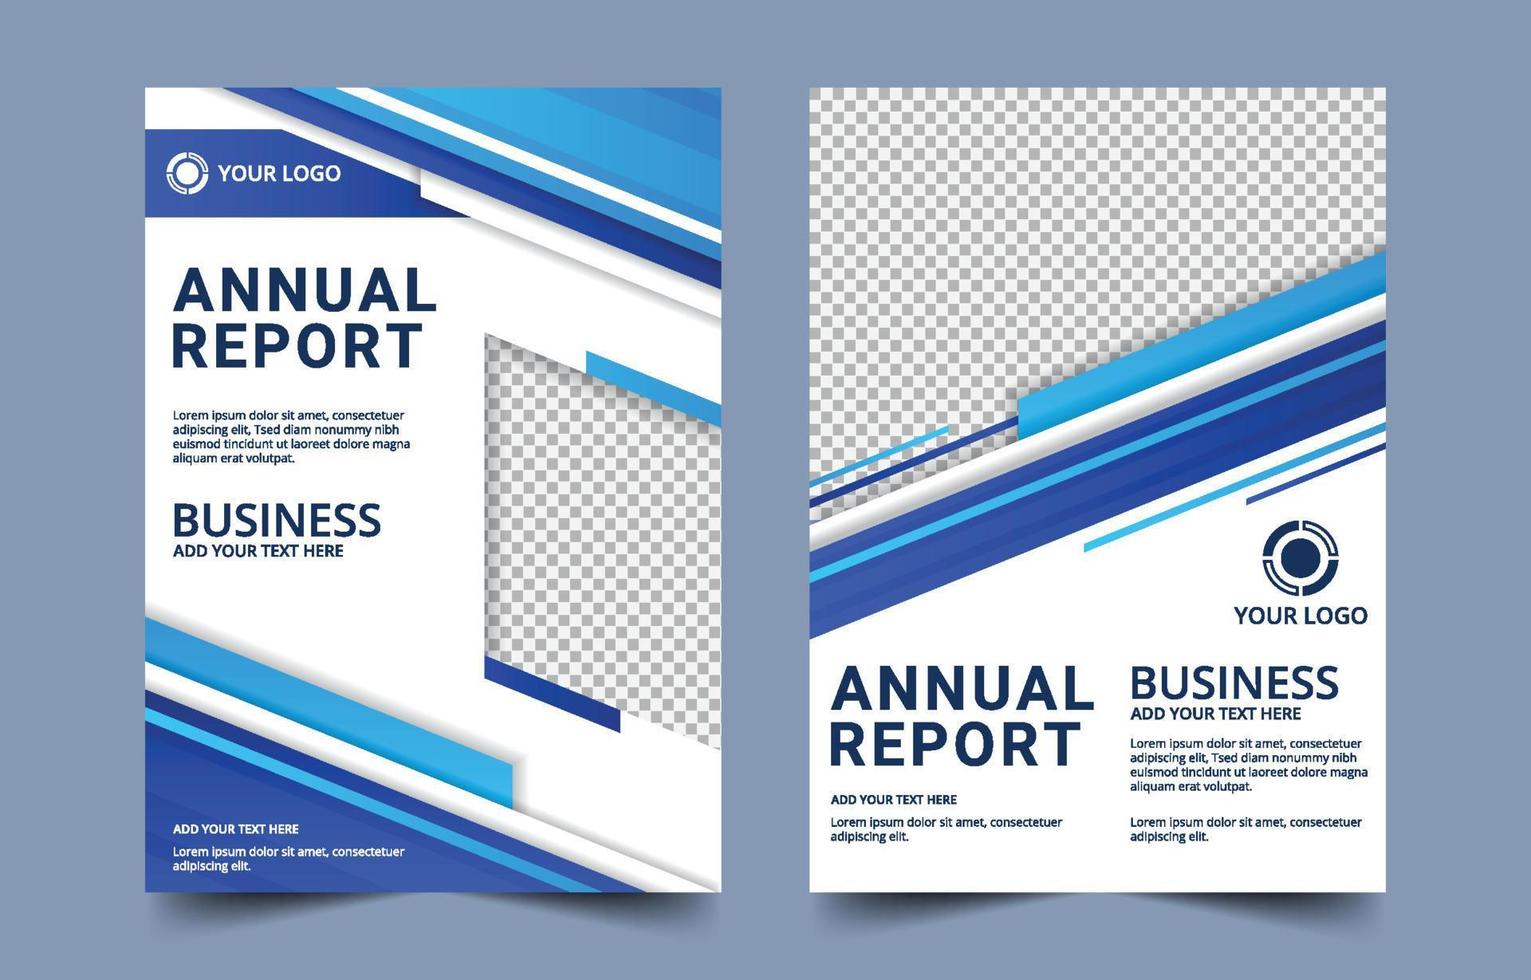 Annual Report Cover Template vector